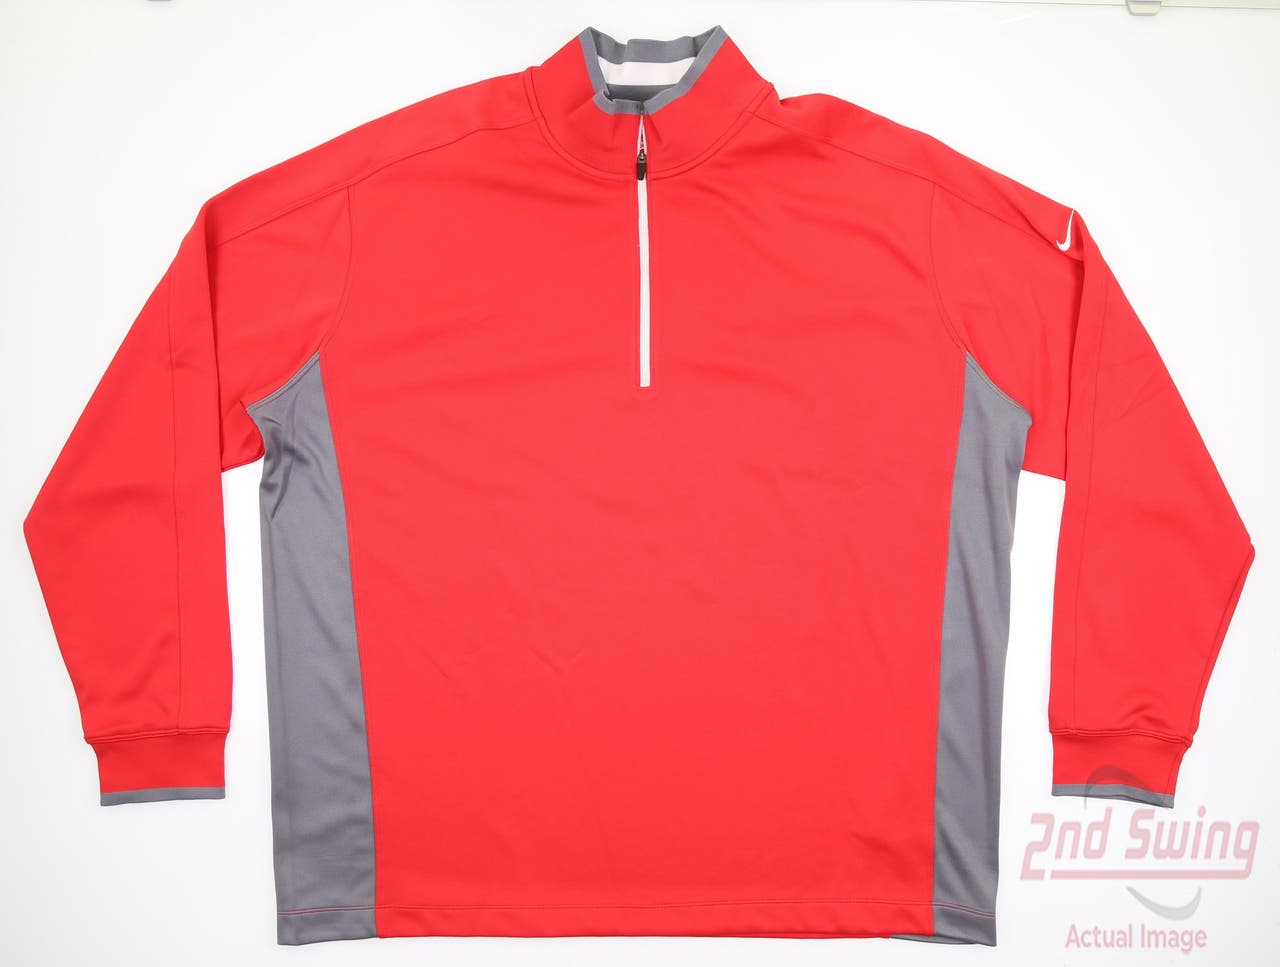 New Mens Nike Golf 1/4 Zip Pullover XX-Large XXL Red/Grey MSRP $75